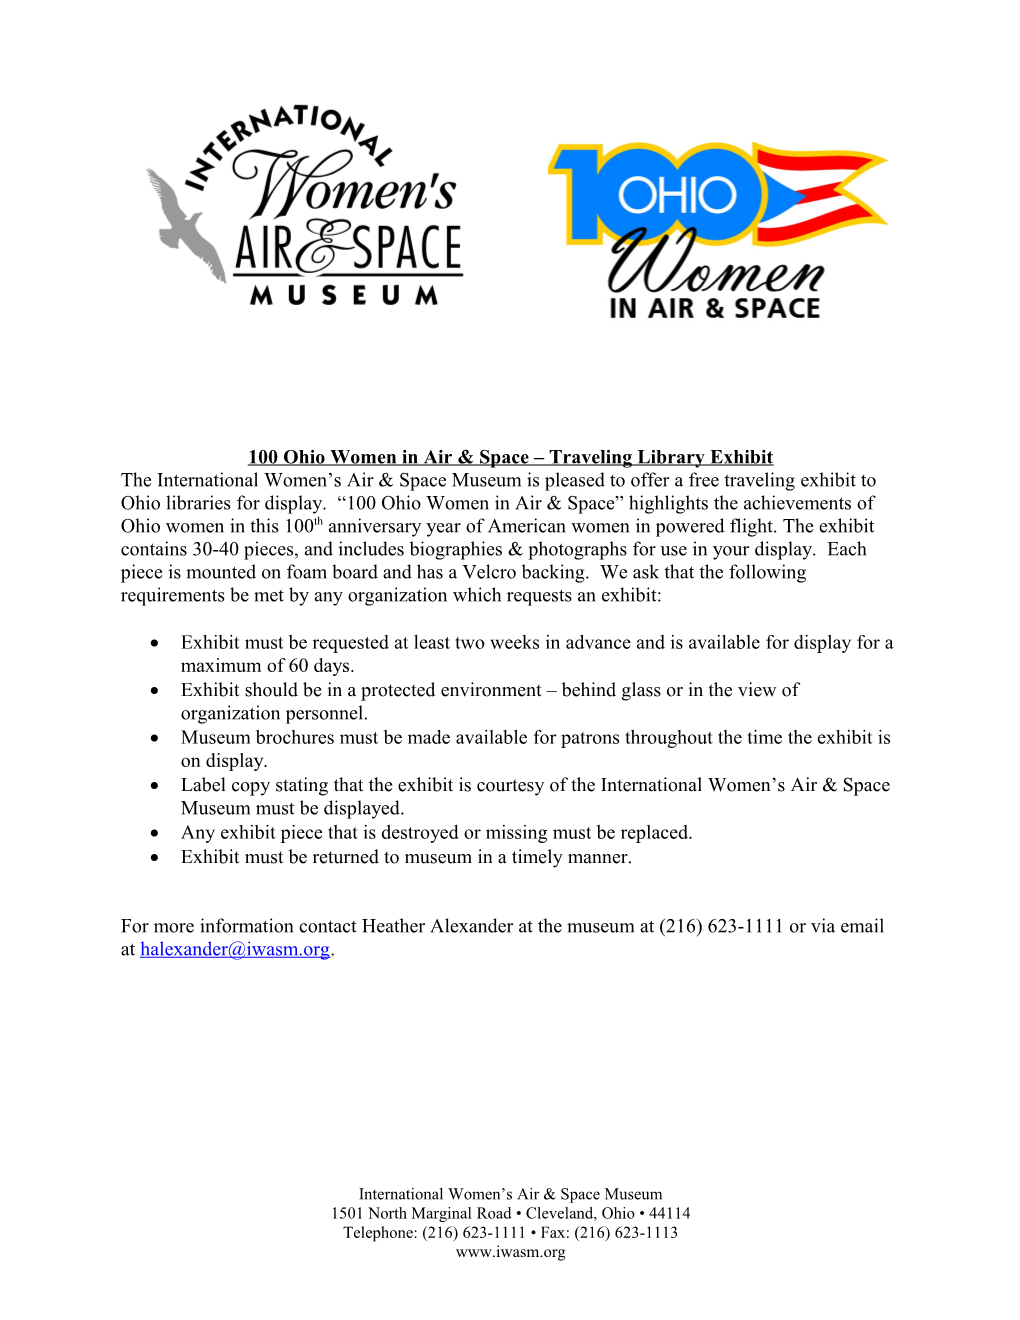 The International Women S Air & Space Museum Offers Free Traveling Exhibits to Libraries